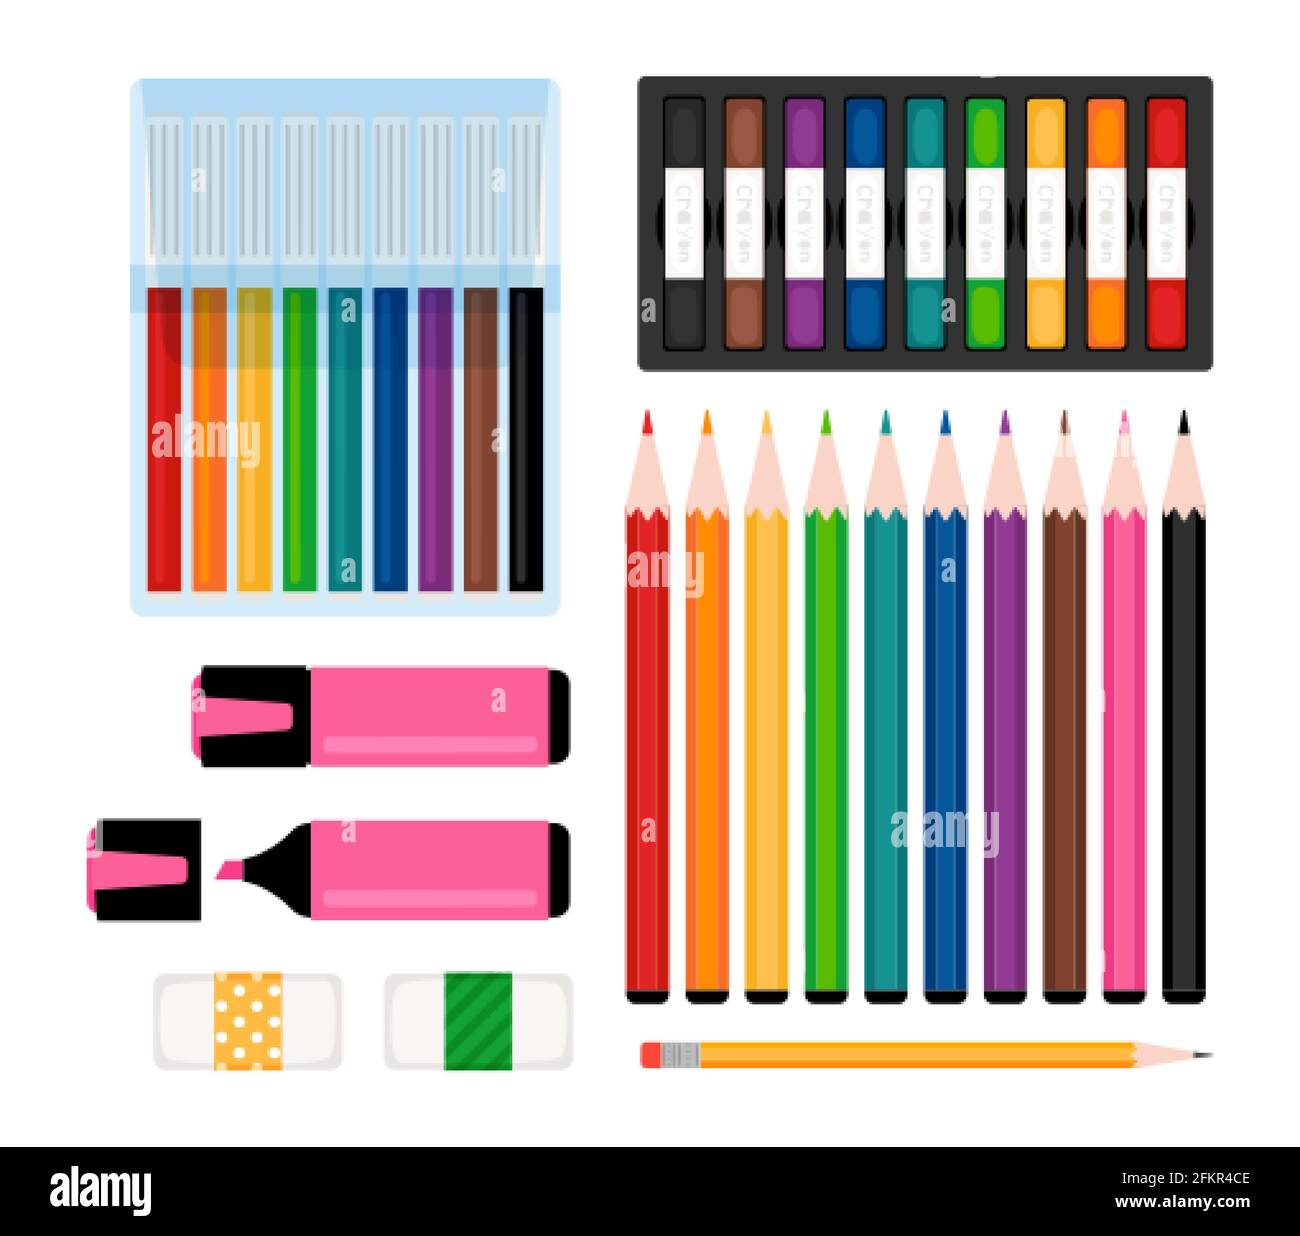 https://c8.alamy.com/comp/2FKR4CE/art-tools-collection-markers-color-pencils-and-erasers-felt-tip-pens-and-highlighter-stationery-vector-illustration-2FKR4CE.jpg